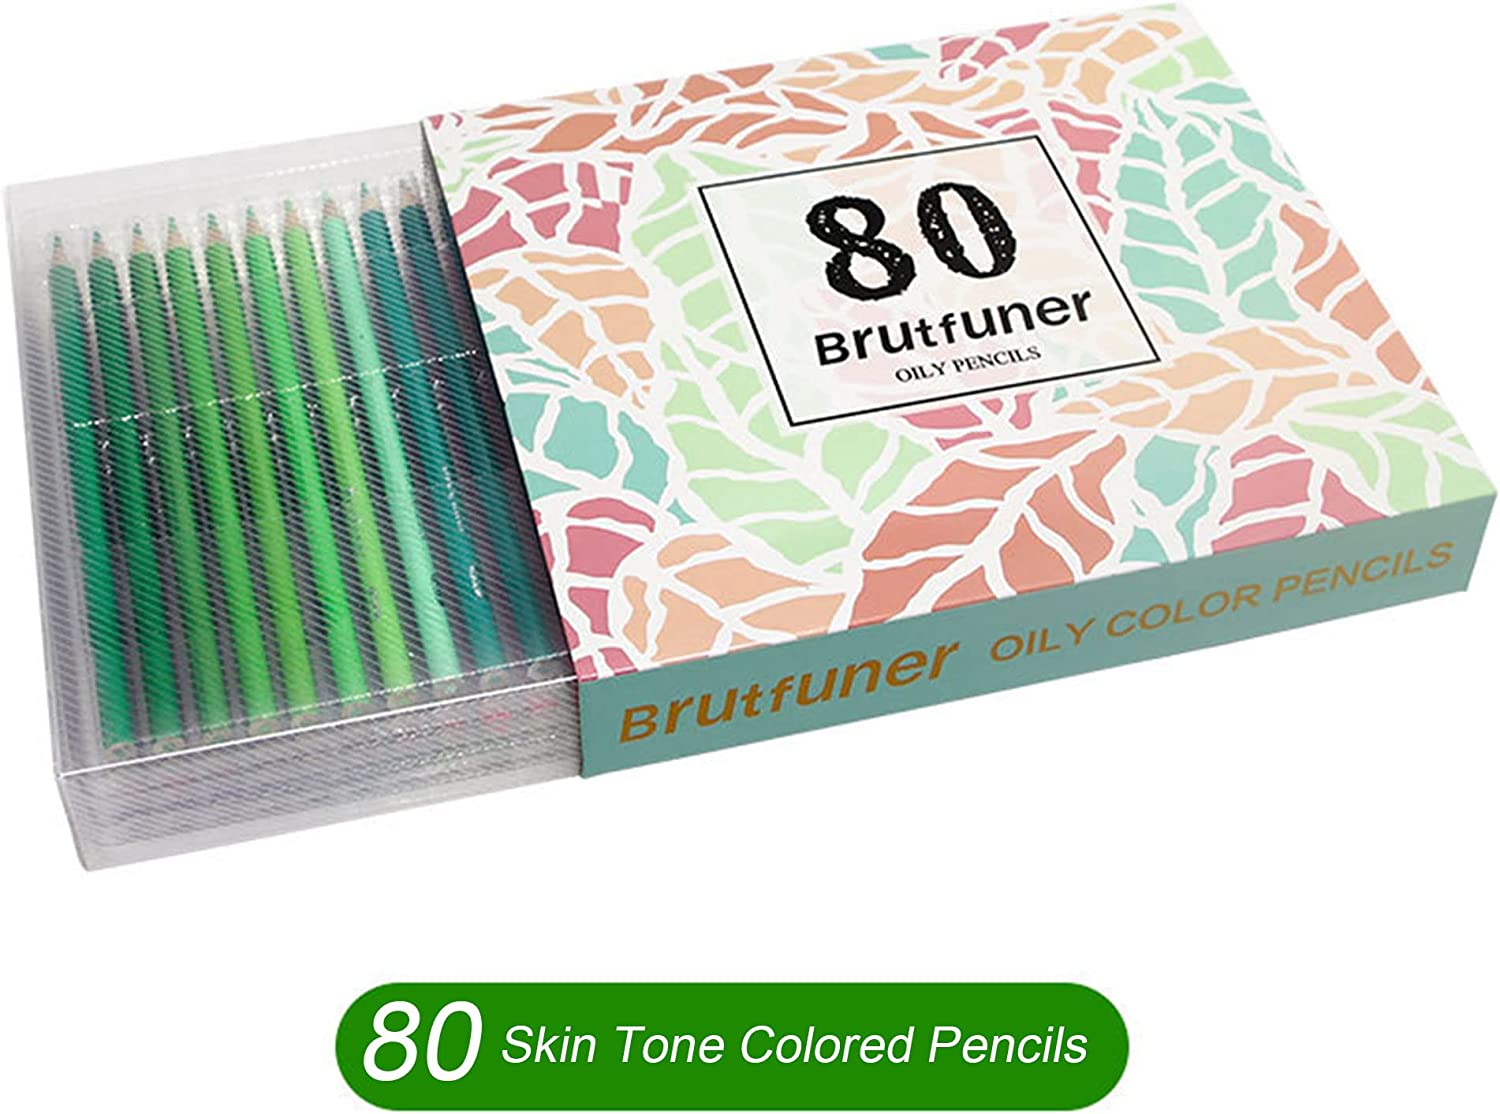 BRUTFUNER Macaron 80 Colored Pencils for Adult Coloring Books